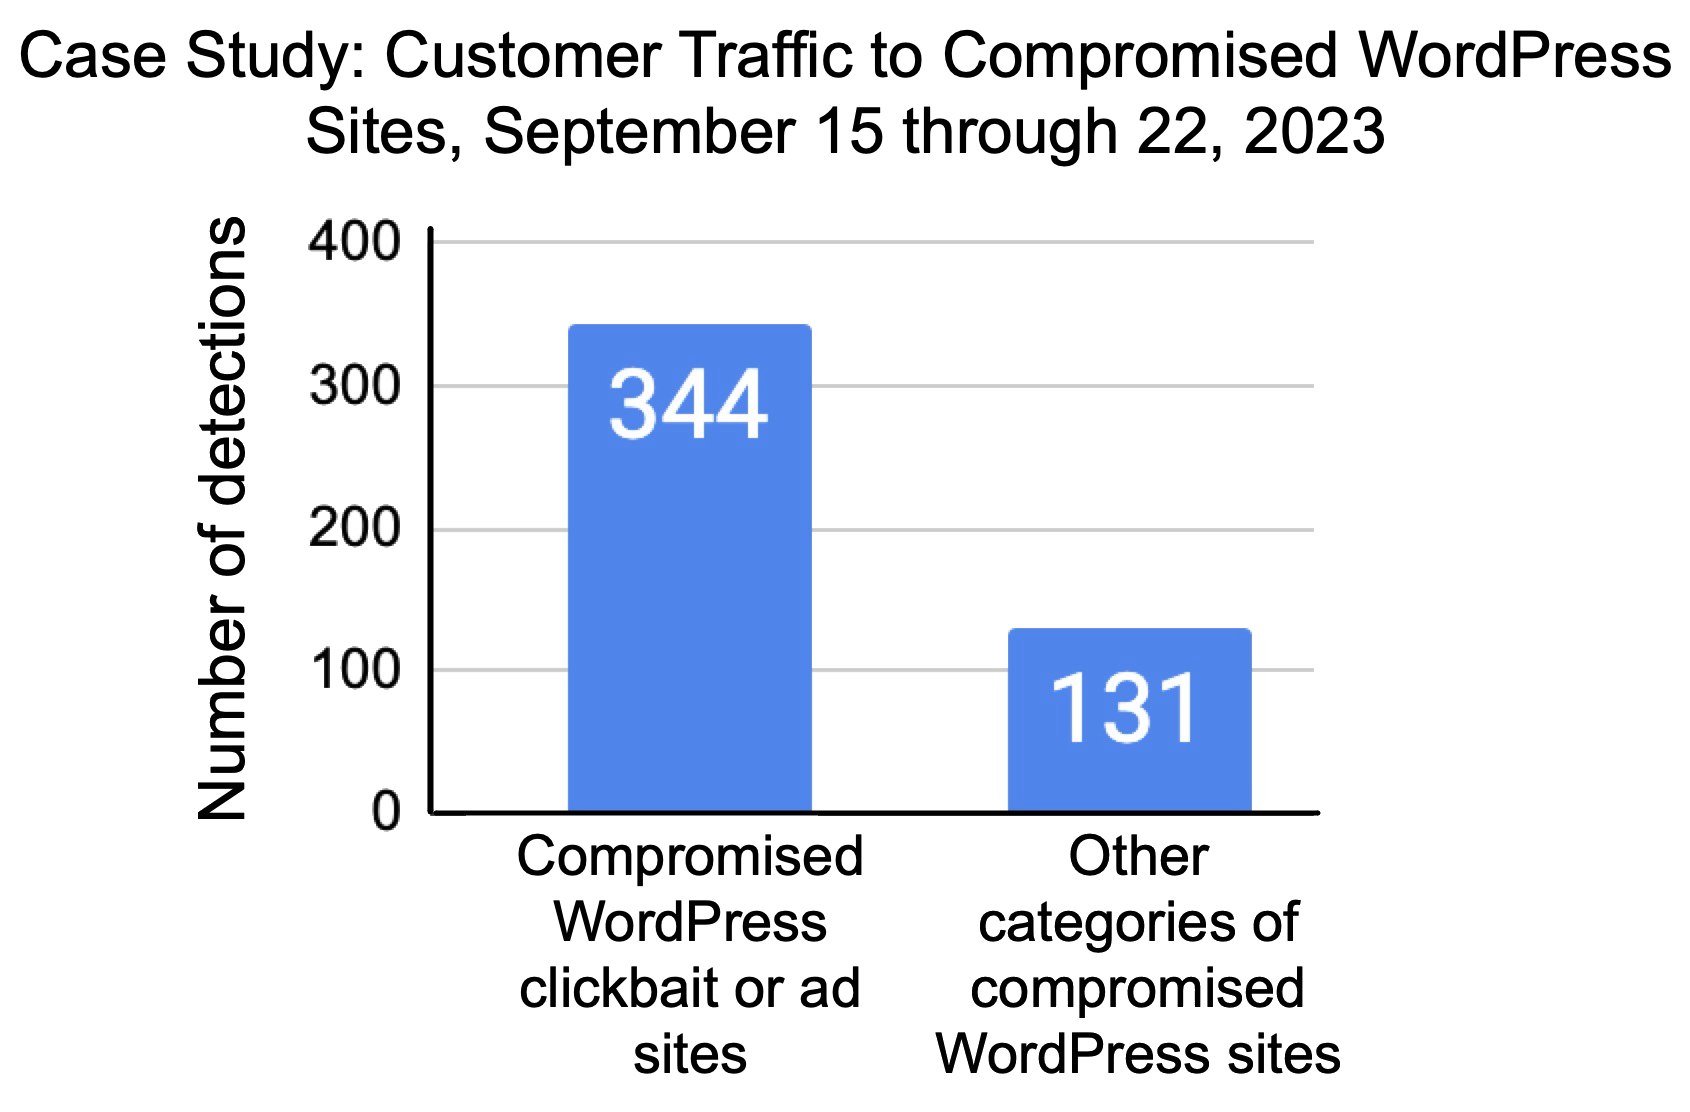 Image 9 is a graph comparing the number of detections of compromised WordPress or clickbait and ad sites versus other categories of compromised WordPress sites. The first category amount is 344. The second category amount is 131.